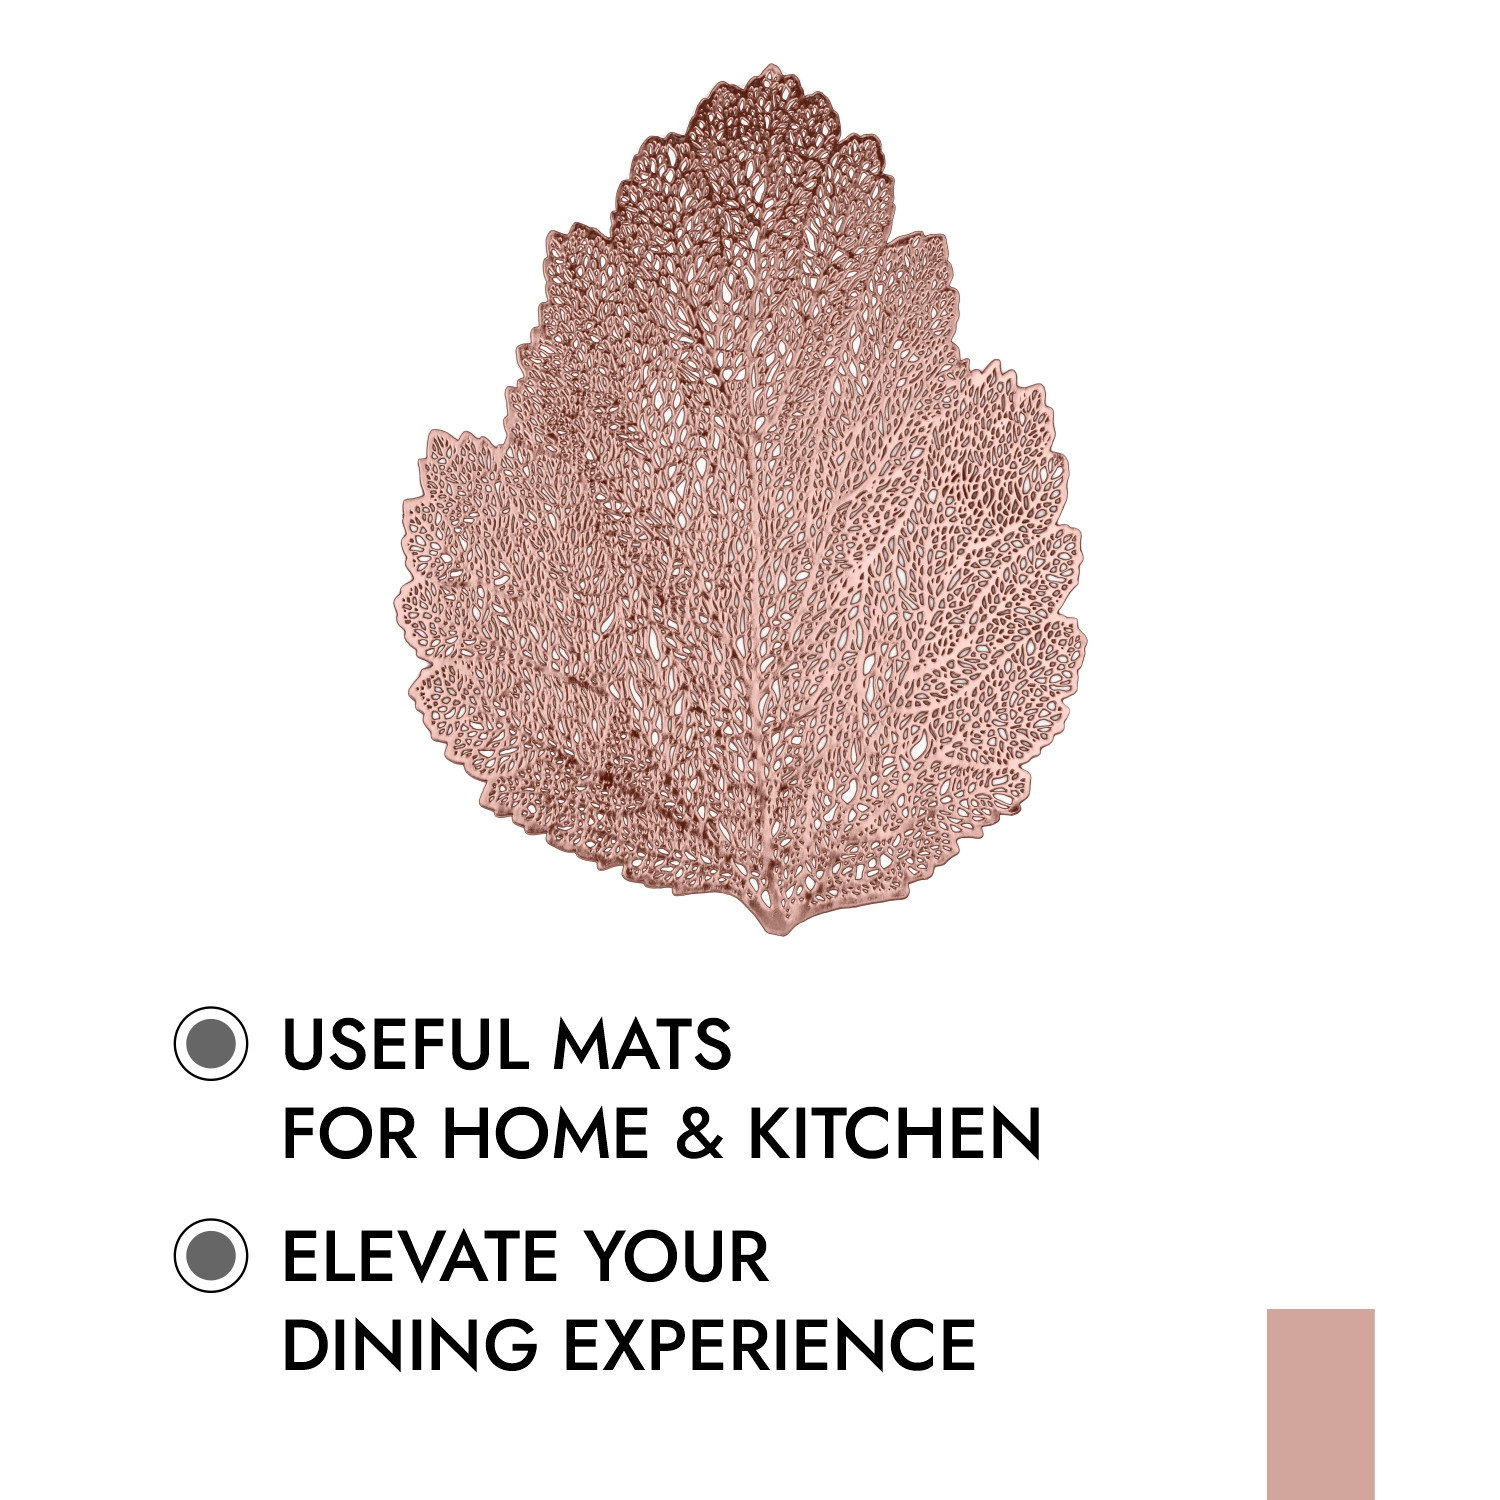 Kuber Industries Placemat | Placemats for Dining Room | Designer Table Mat Set | Placemats for Kitchen Table | Side Table Placemats | Patta Shape Placemat |Copper